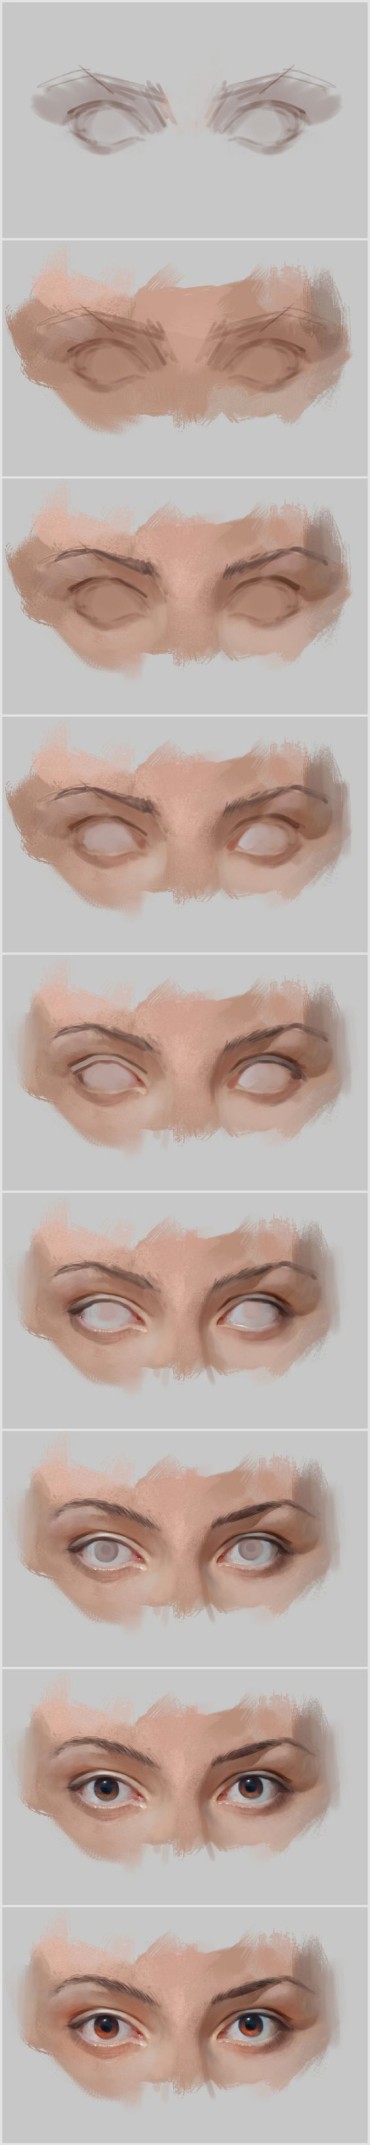 Eyes drawing process in photoshop - A digital painting idea to inspire you draw 